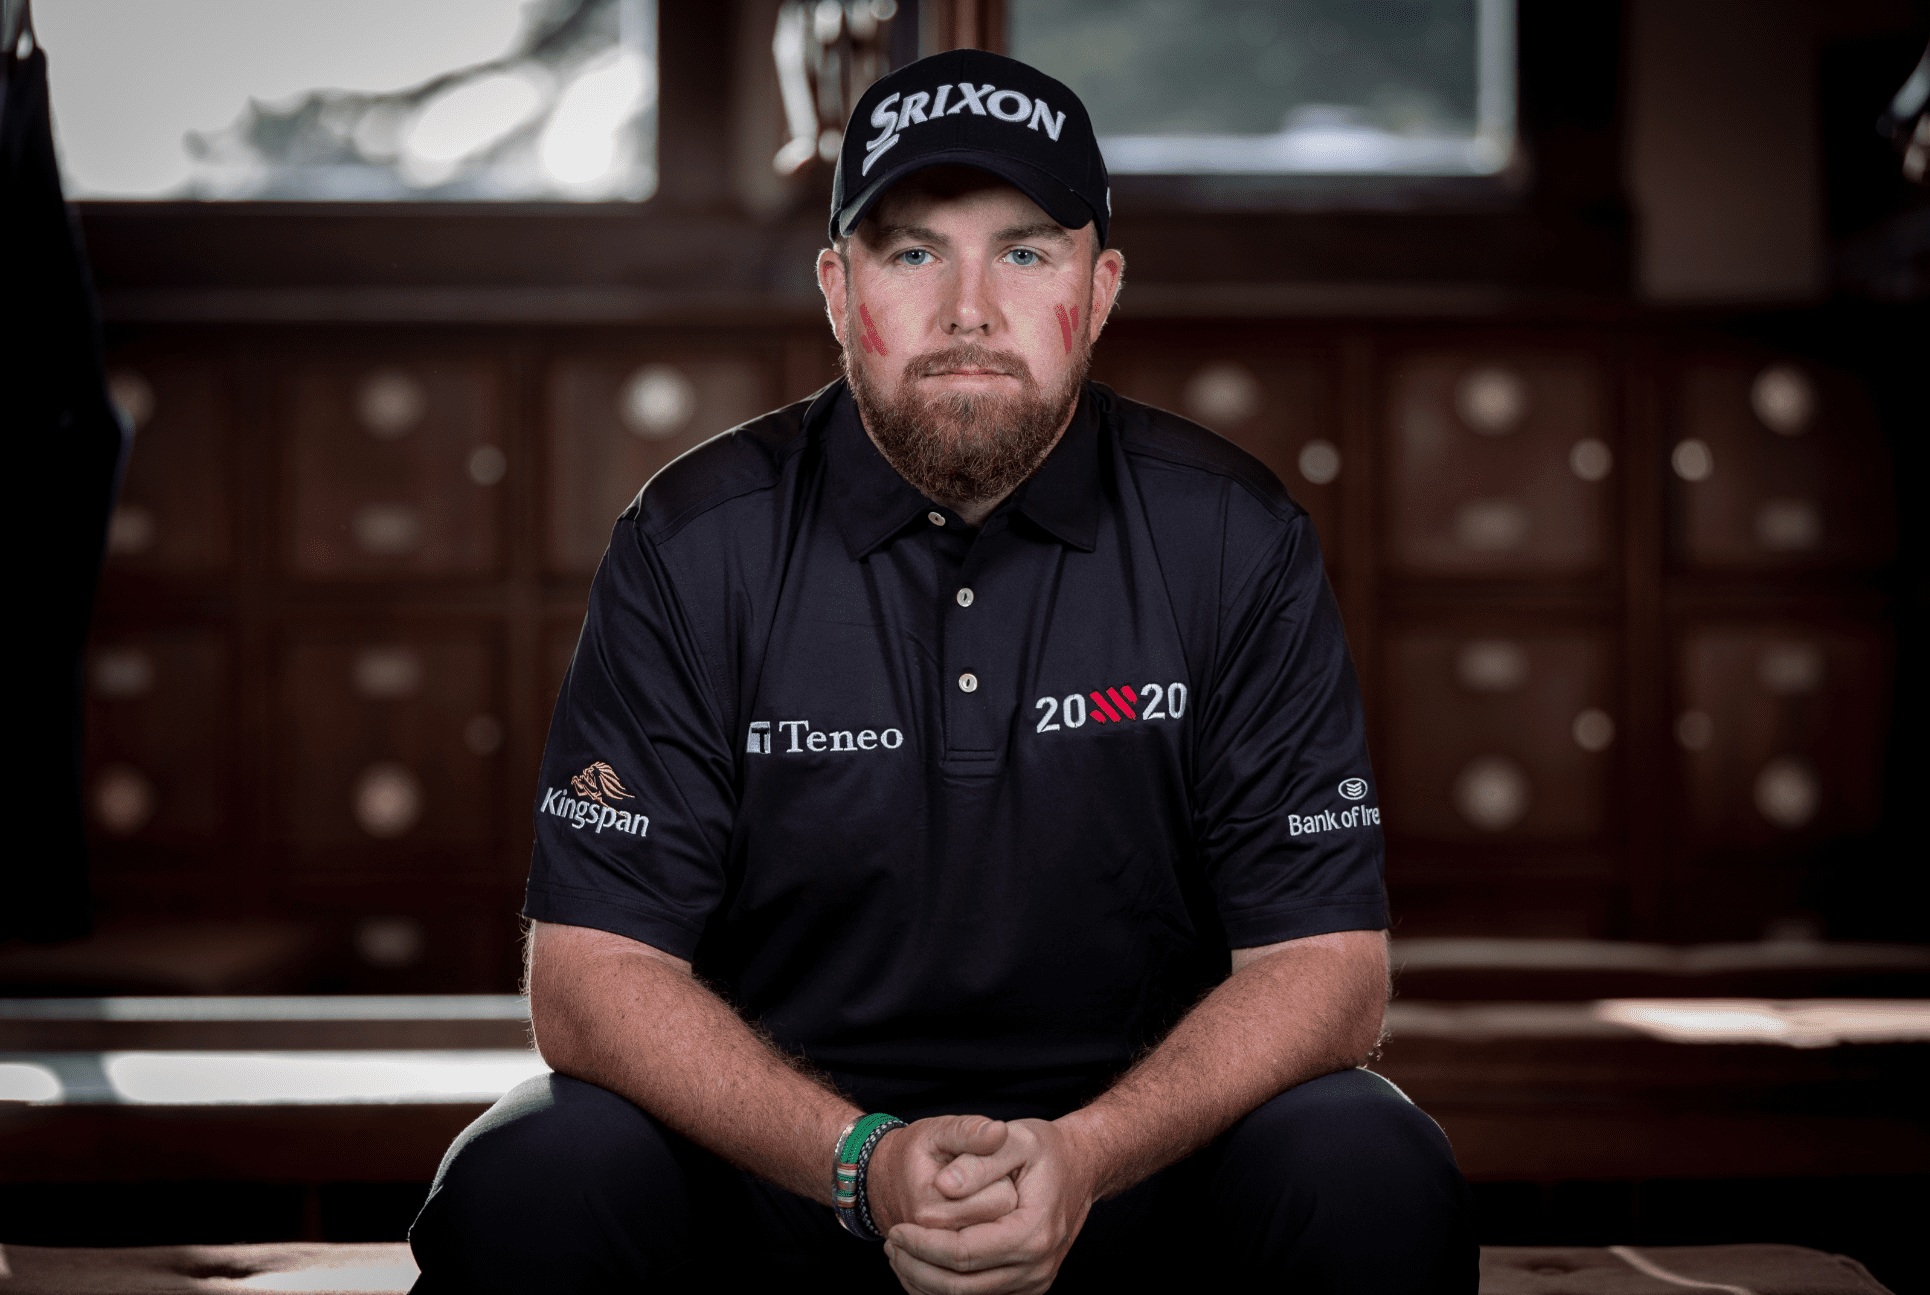 Shane Lowry: 2020 Support